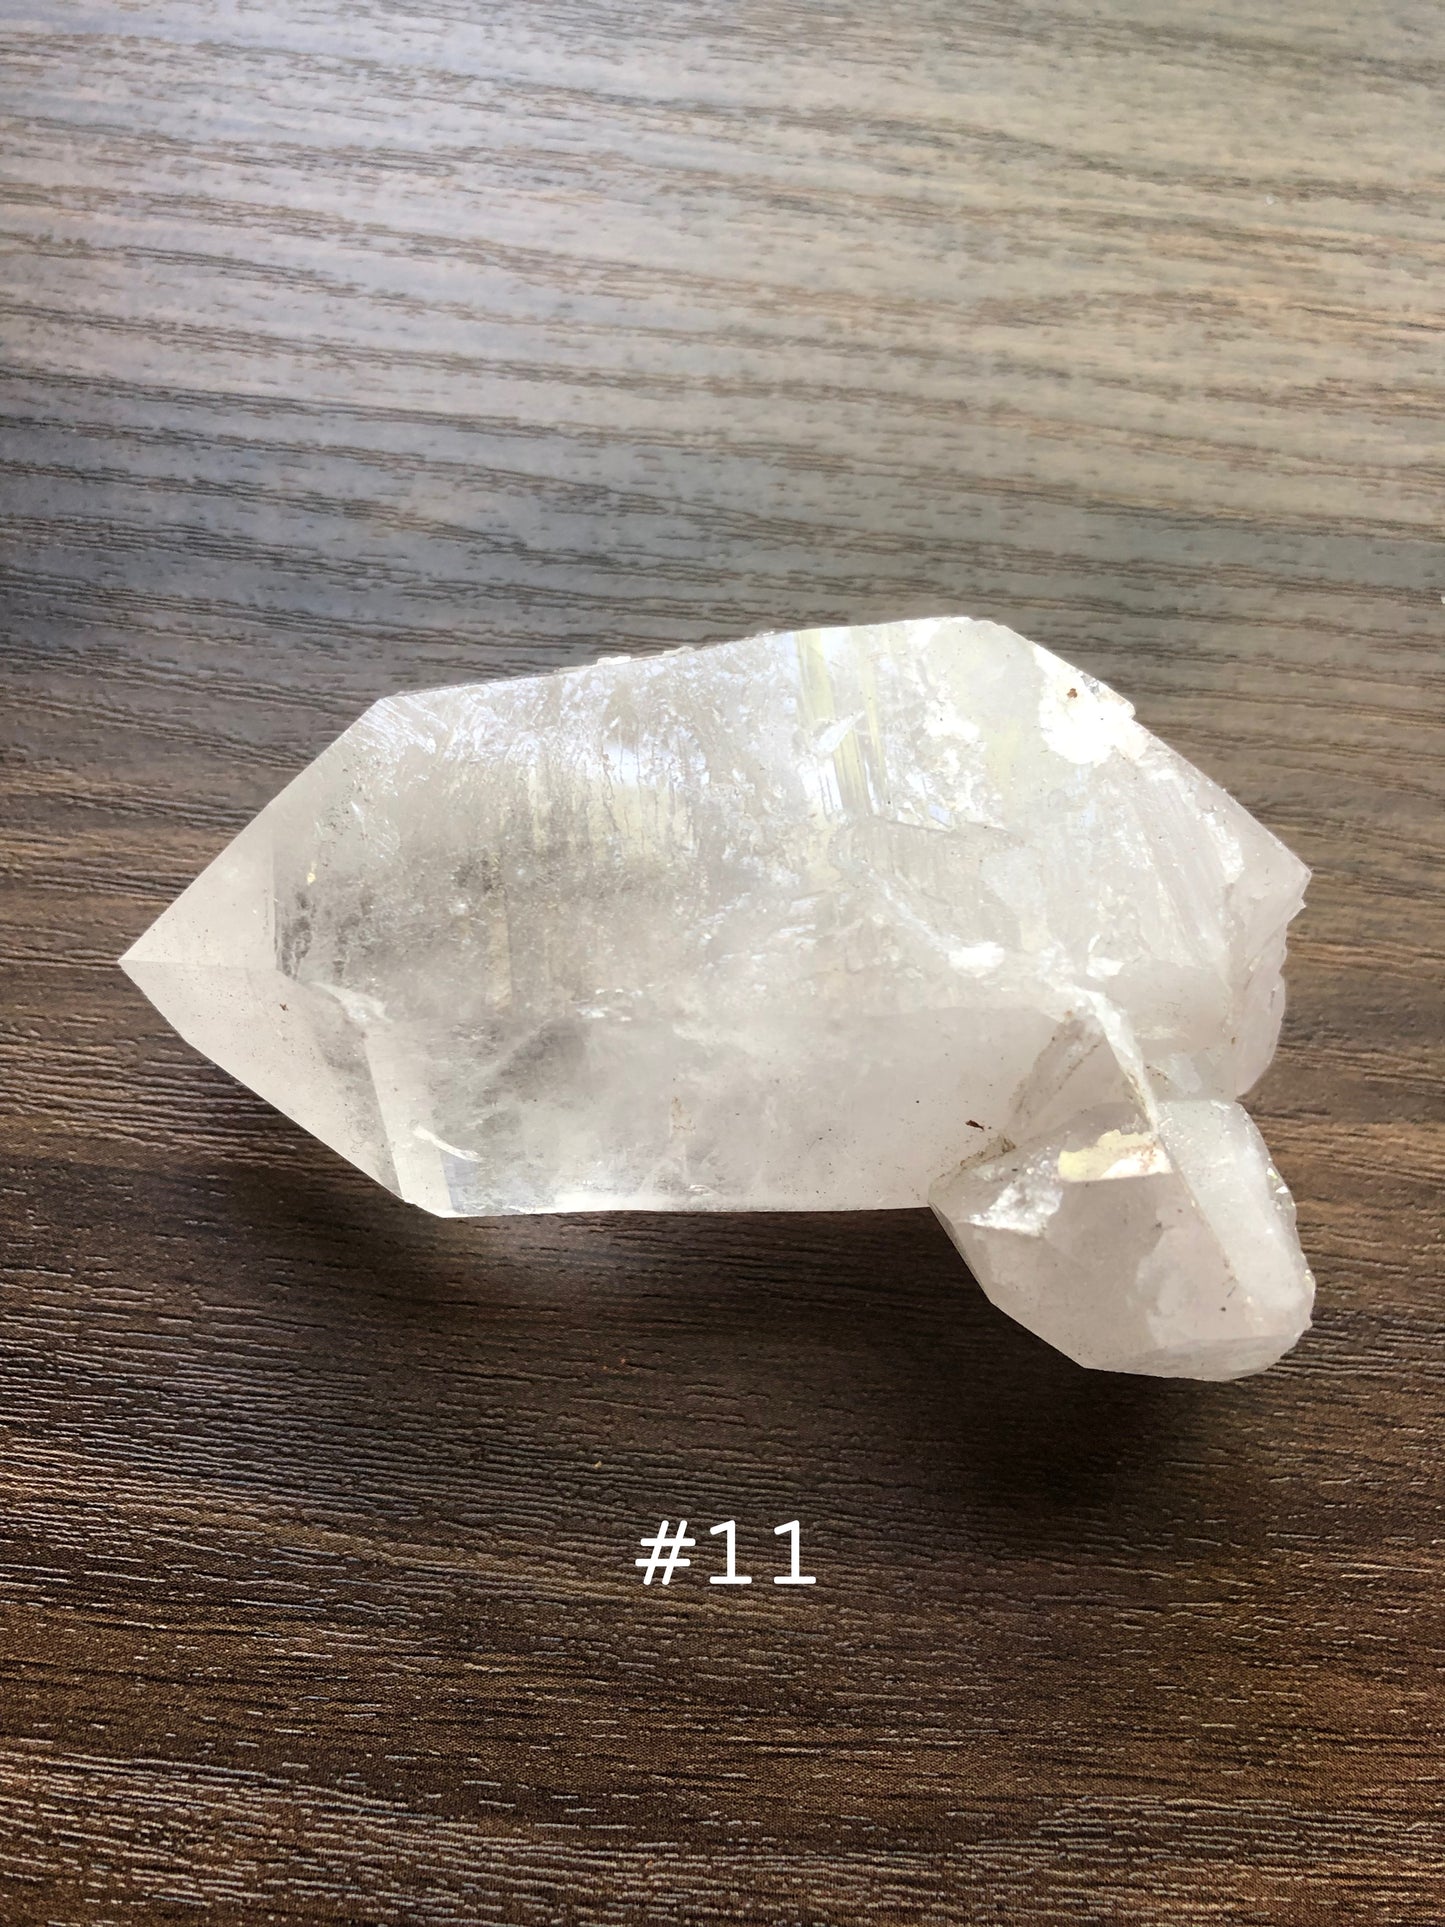 A large, rough cut quartz crystal rests on a wooden surface. It comes to a small point with a small cluster on it. The crystal is relatively clear. The number 11 is shown on the picture.